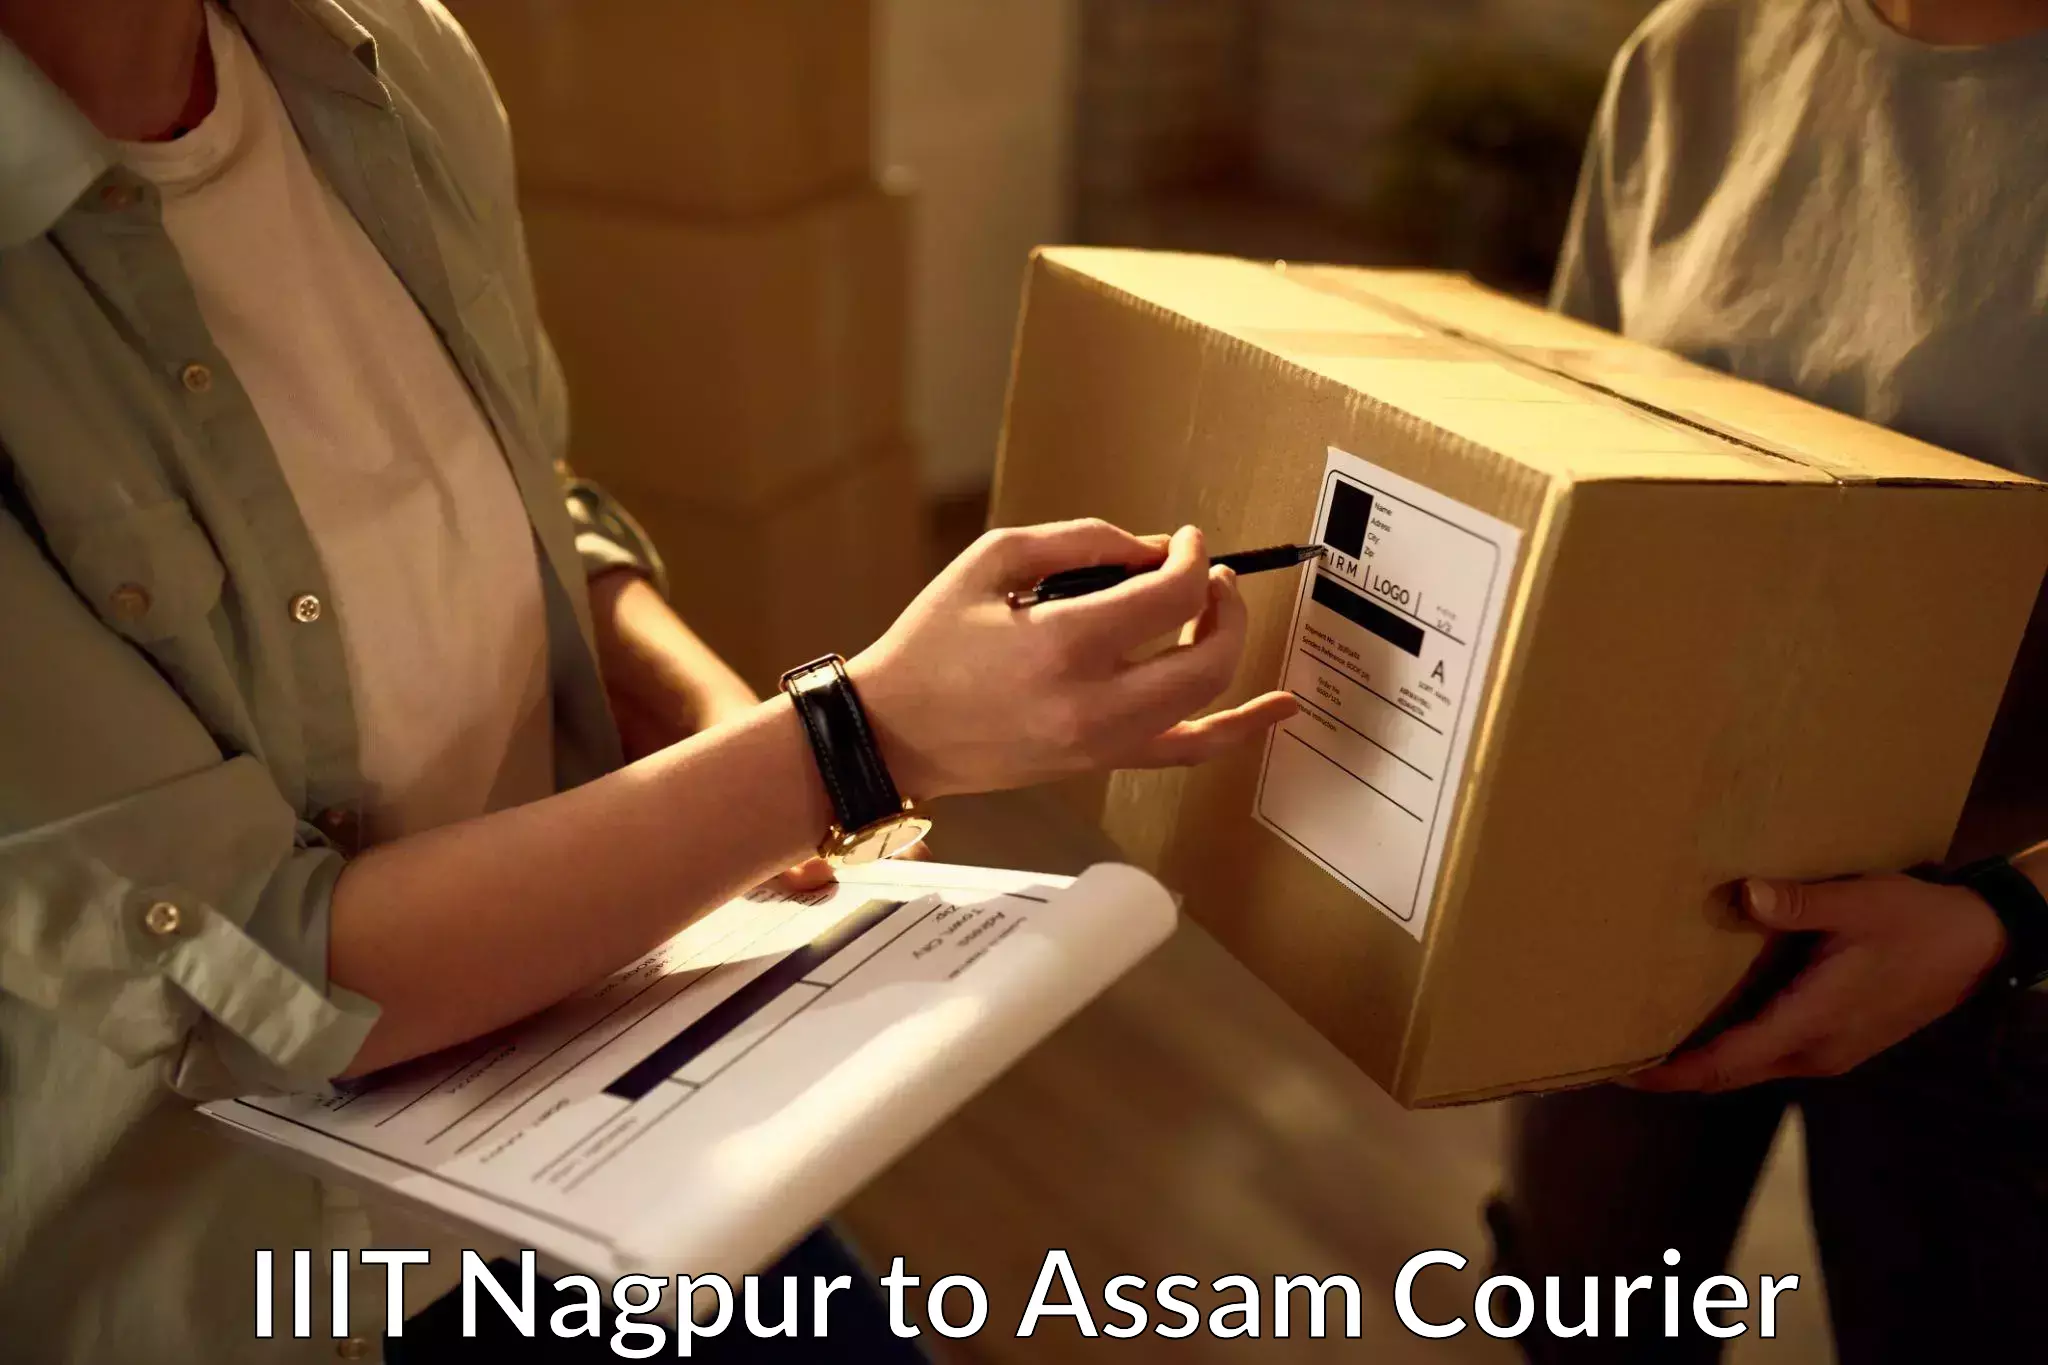 Personal courier services IIIT Nagpur to Silapathar